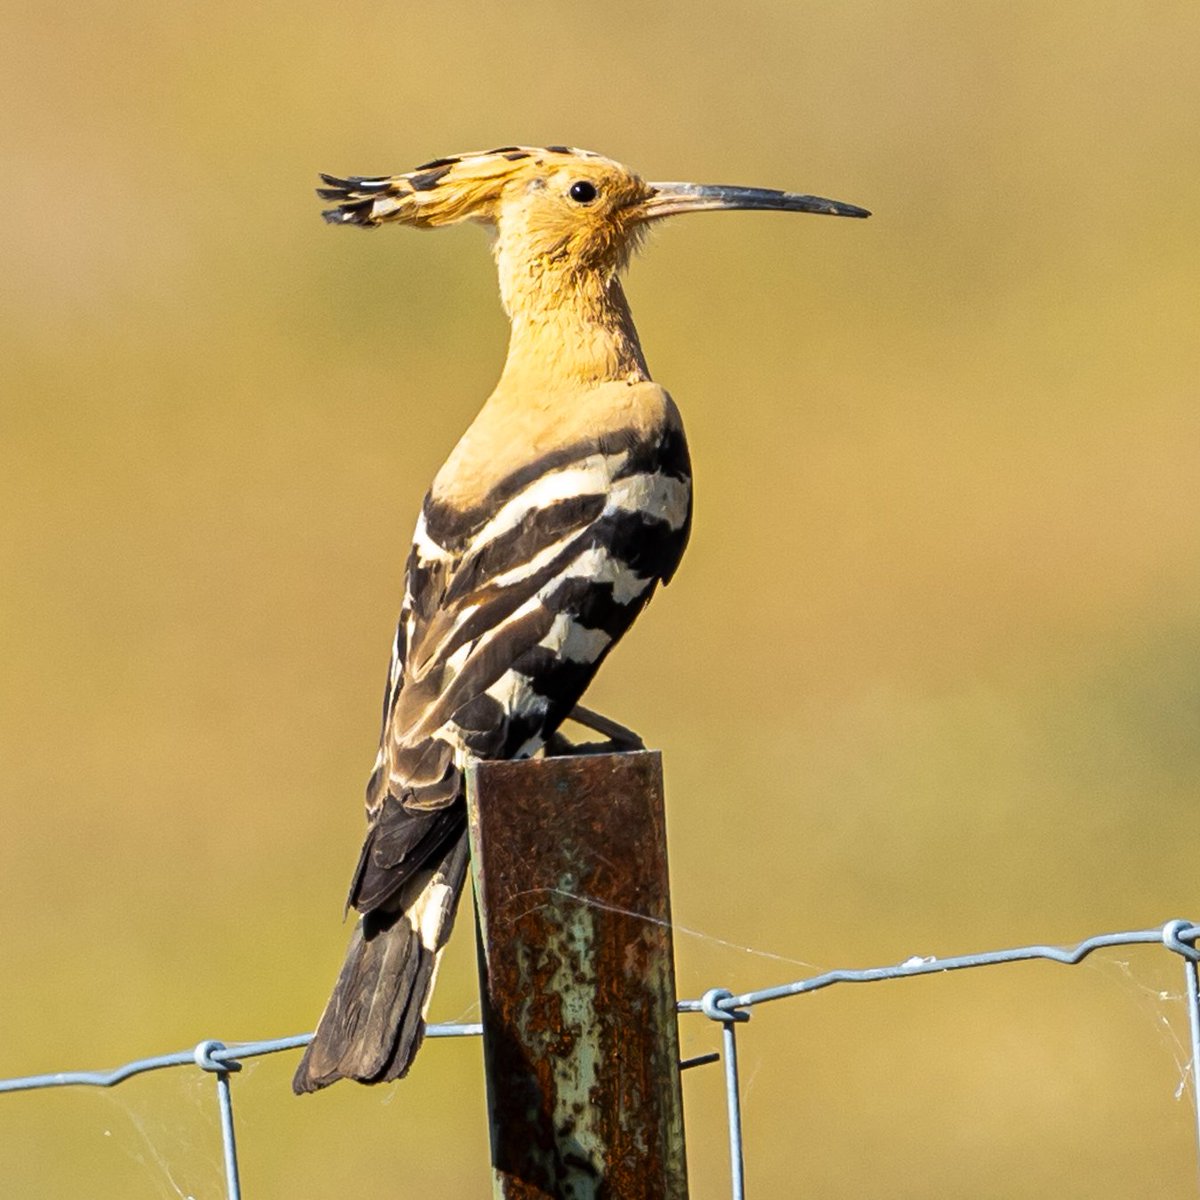 Mid-way through my second Extremadura Tour this spring. Hoopoe's are always a firm favourite with guests! Llanos de Cáceres, Extremadura, Spain Sign up for my newsletter: theurbanbirderworld.com @extremadura_tur @birdextremadura @OlympusUK @LeicaBirding @TravWriters